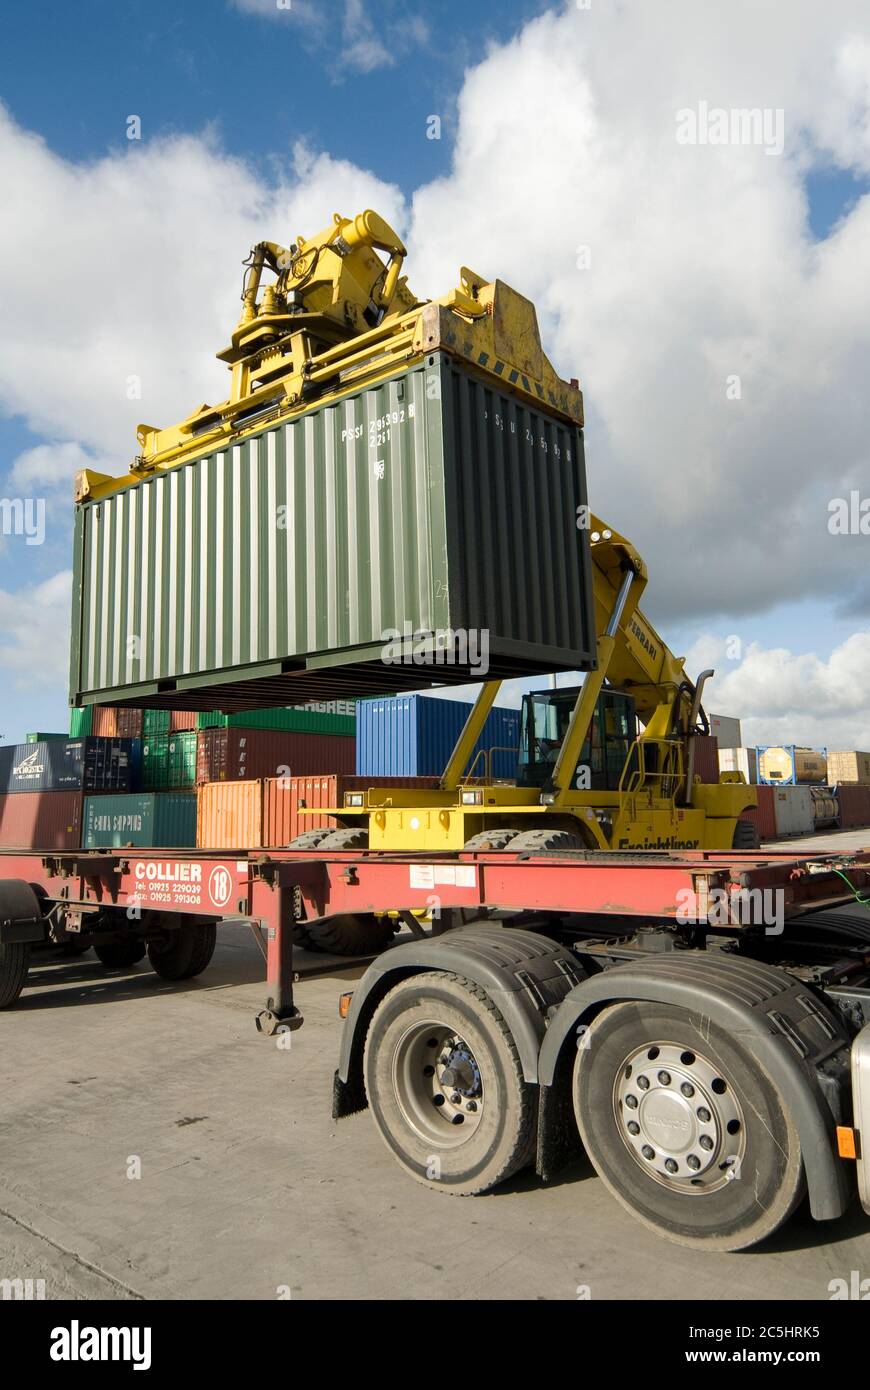 CVS Ferrari reach stacker being used to load a shipping container onto a lorry at Manchester Euroterminal, Trafford Park, Manchester, England. Stock Photo